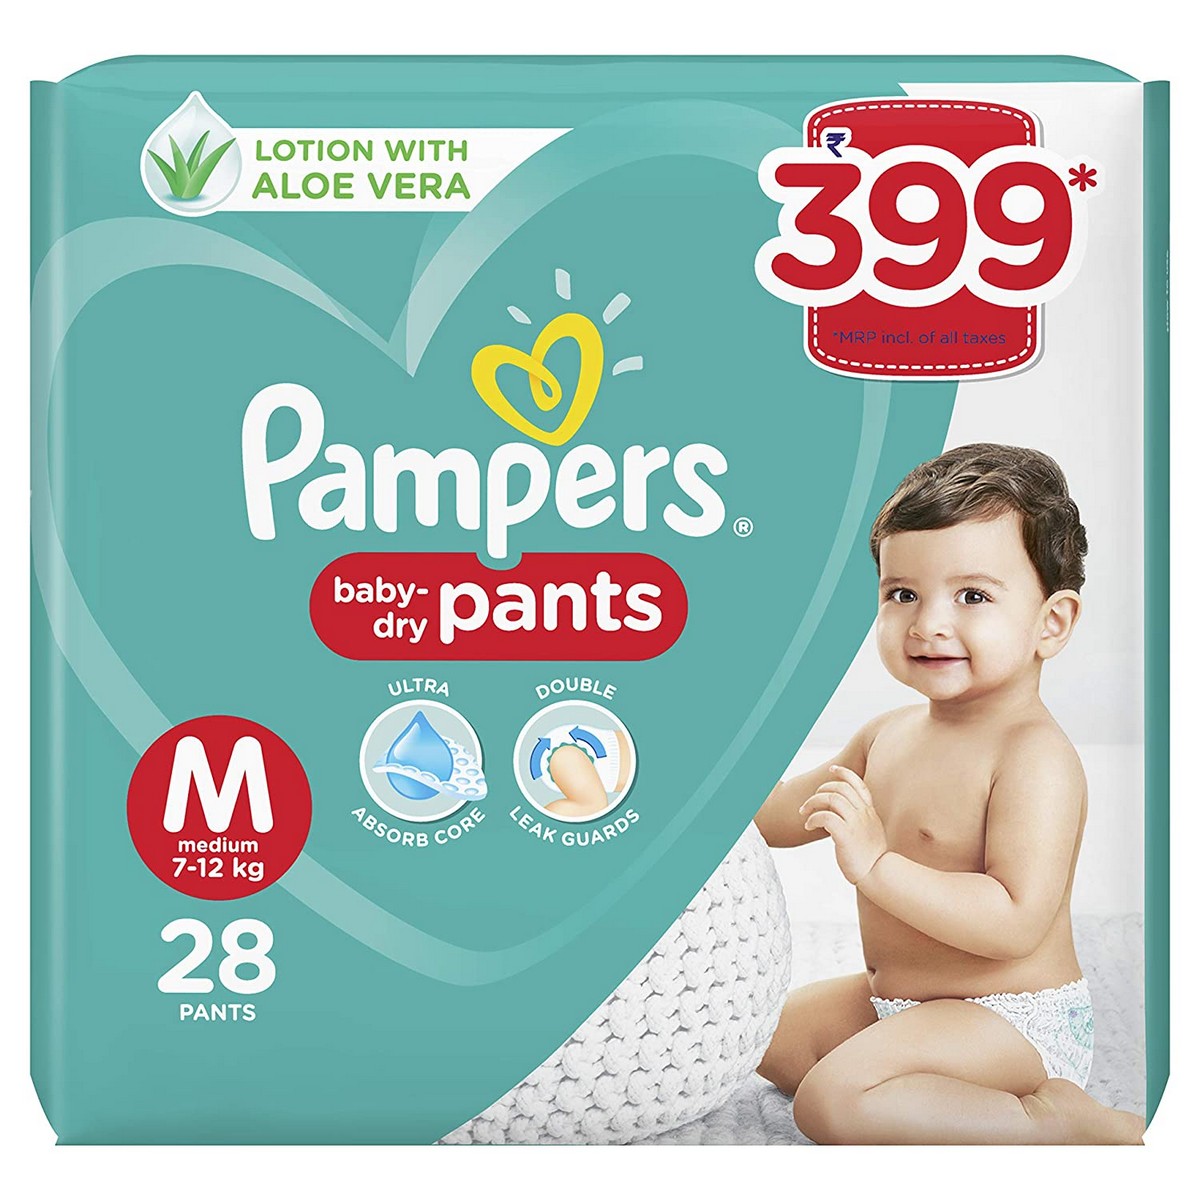 Pampers All round Protection Pants, Medium Size Baby Diapers (28